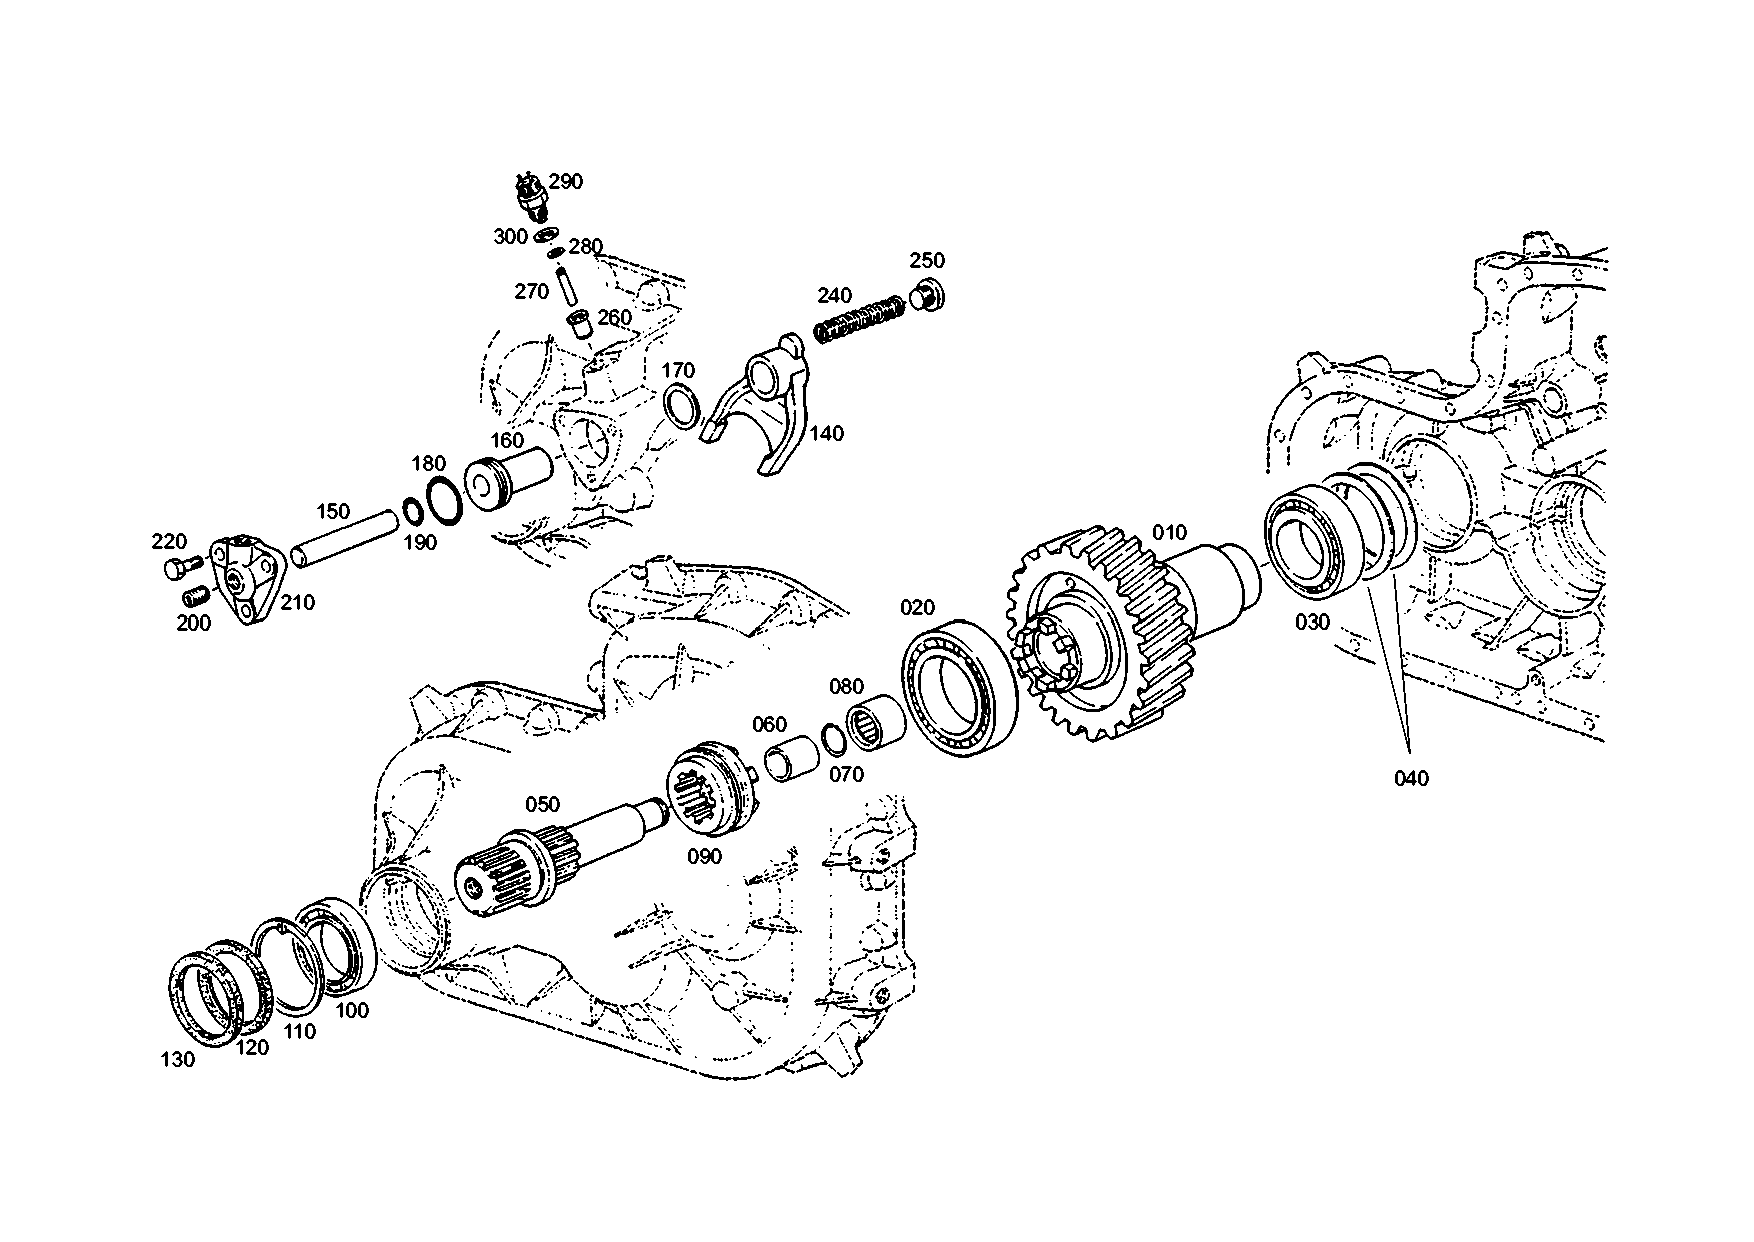 drawing for RENAULT 170750240026 - PISTON (figure 5)